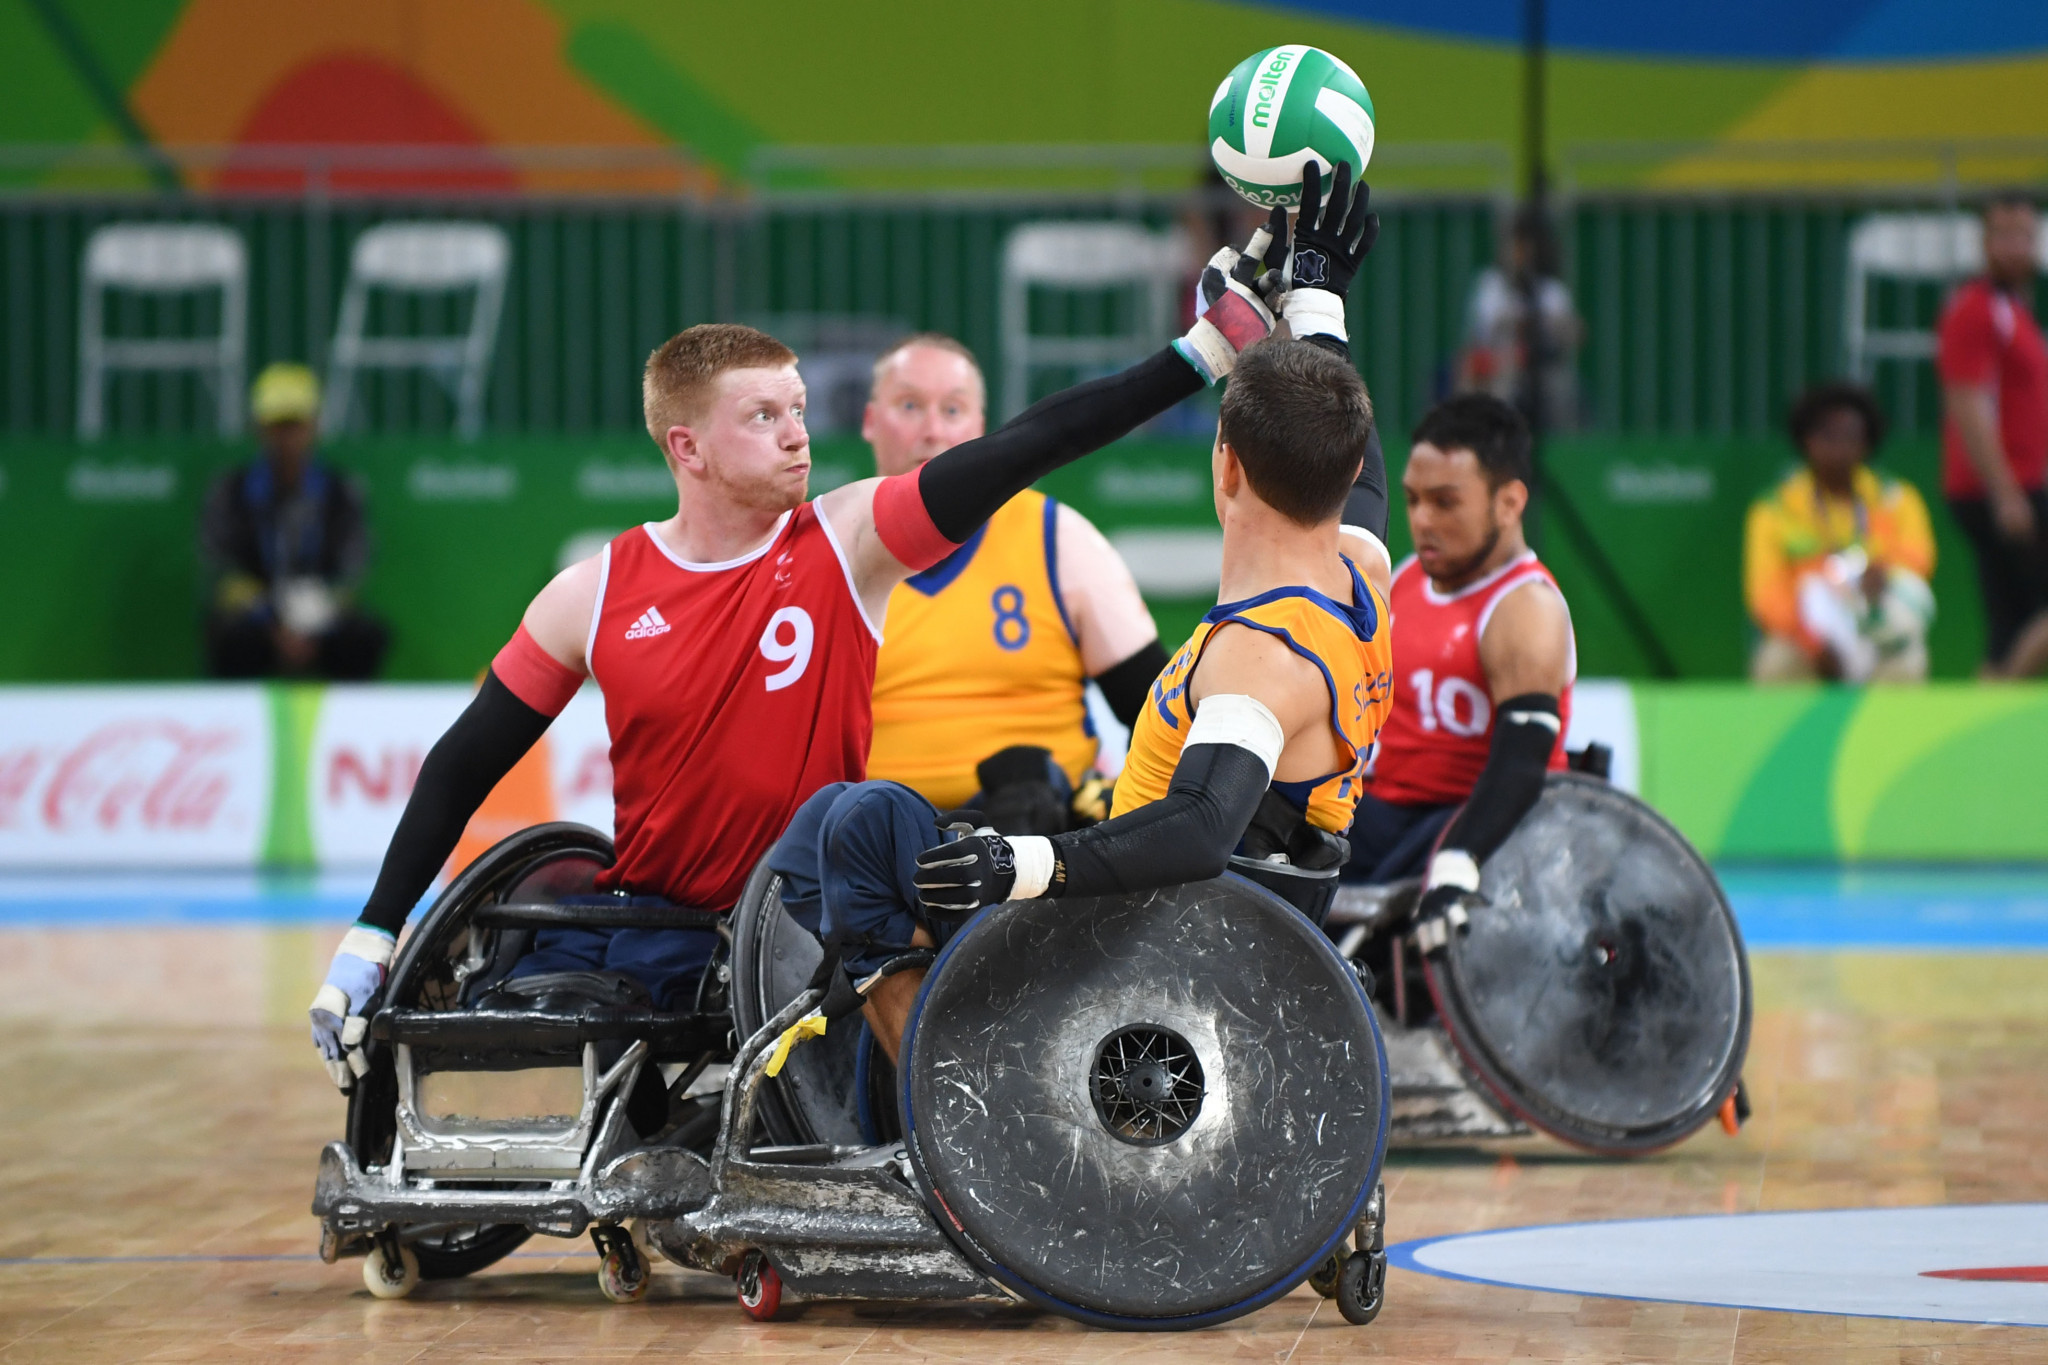 Britain's best finish in wheelchair rugby at the Paralympics is fourth - achieved on three occasions ©Getty Images